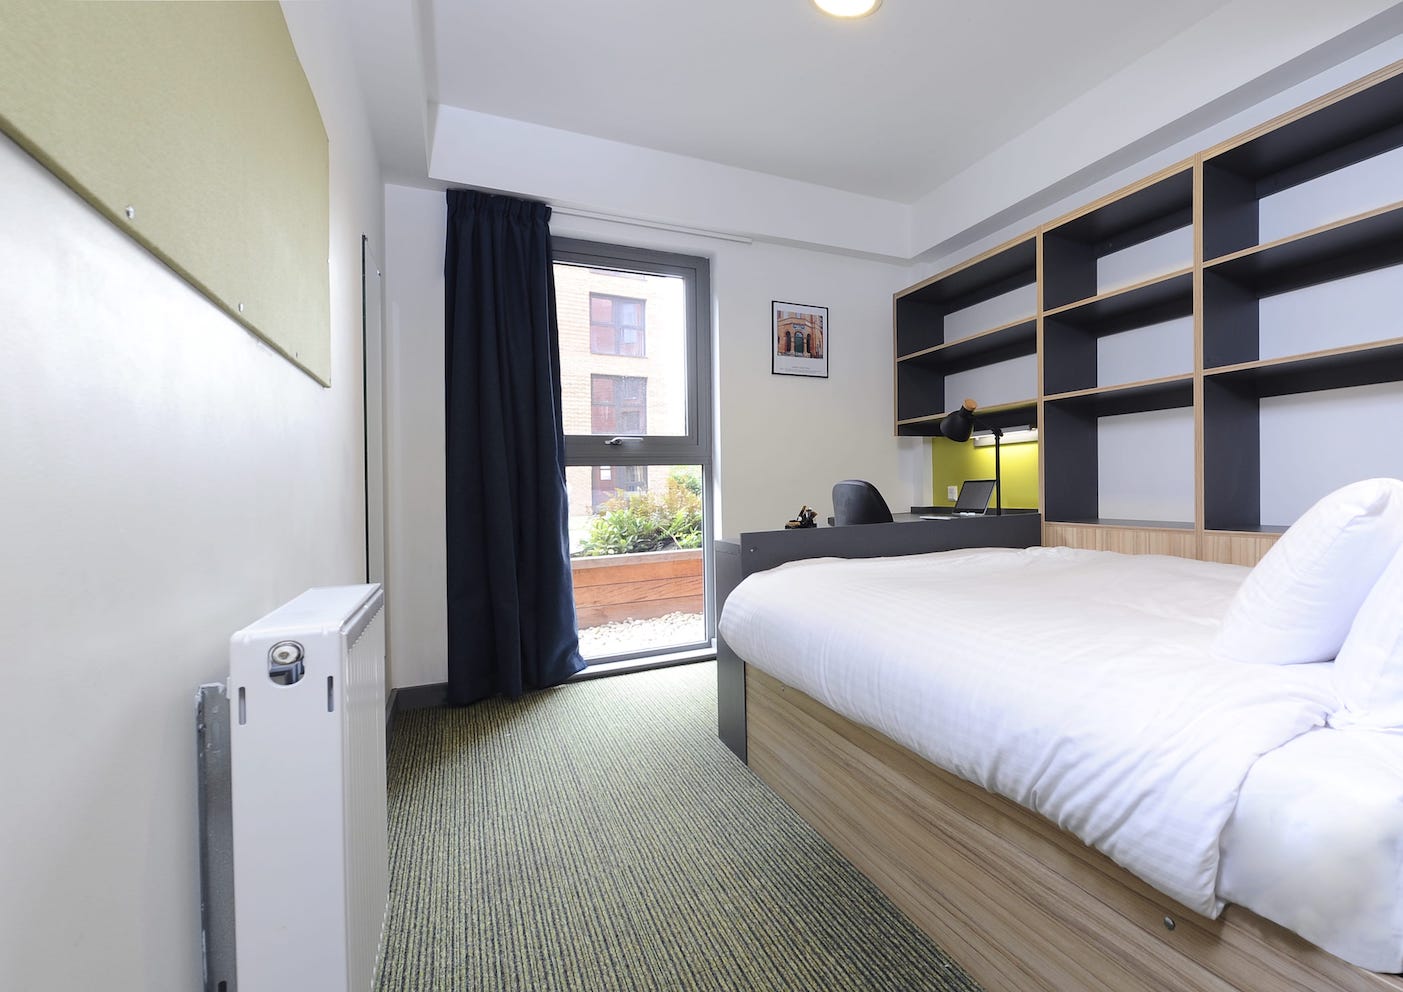 A typical bedroom at Manchester City’s residential football camp in the UK. The bedroom has a window, a double bed with white bedding and a desk.